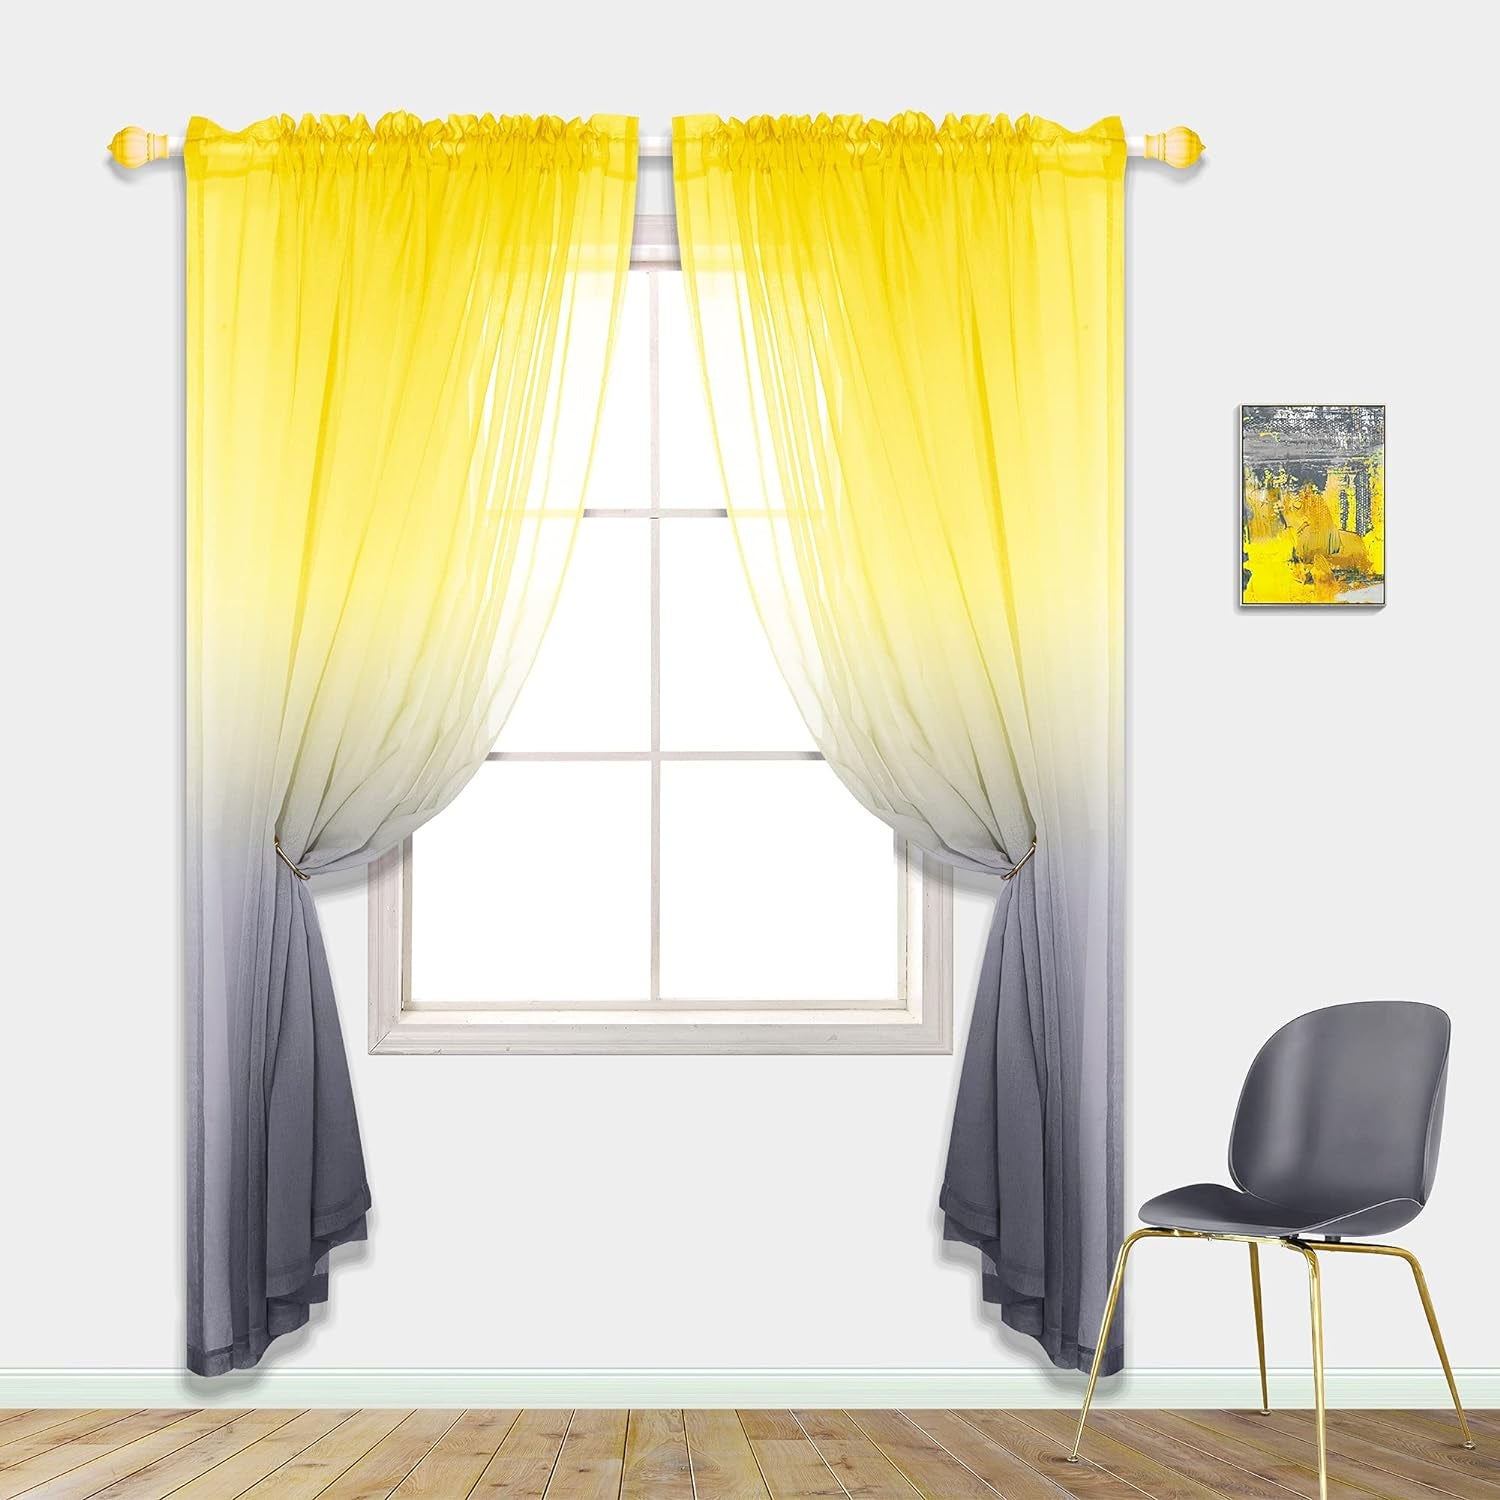 Spring Sheer Curtains for Living Room with Rod Pocket Window Treatments Decor 84 Inch Length Bedroom Curtain Set of 2 Panels Yellow and Grey Gray  PITALK TEXTILE   